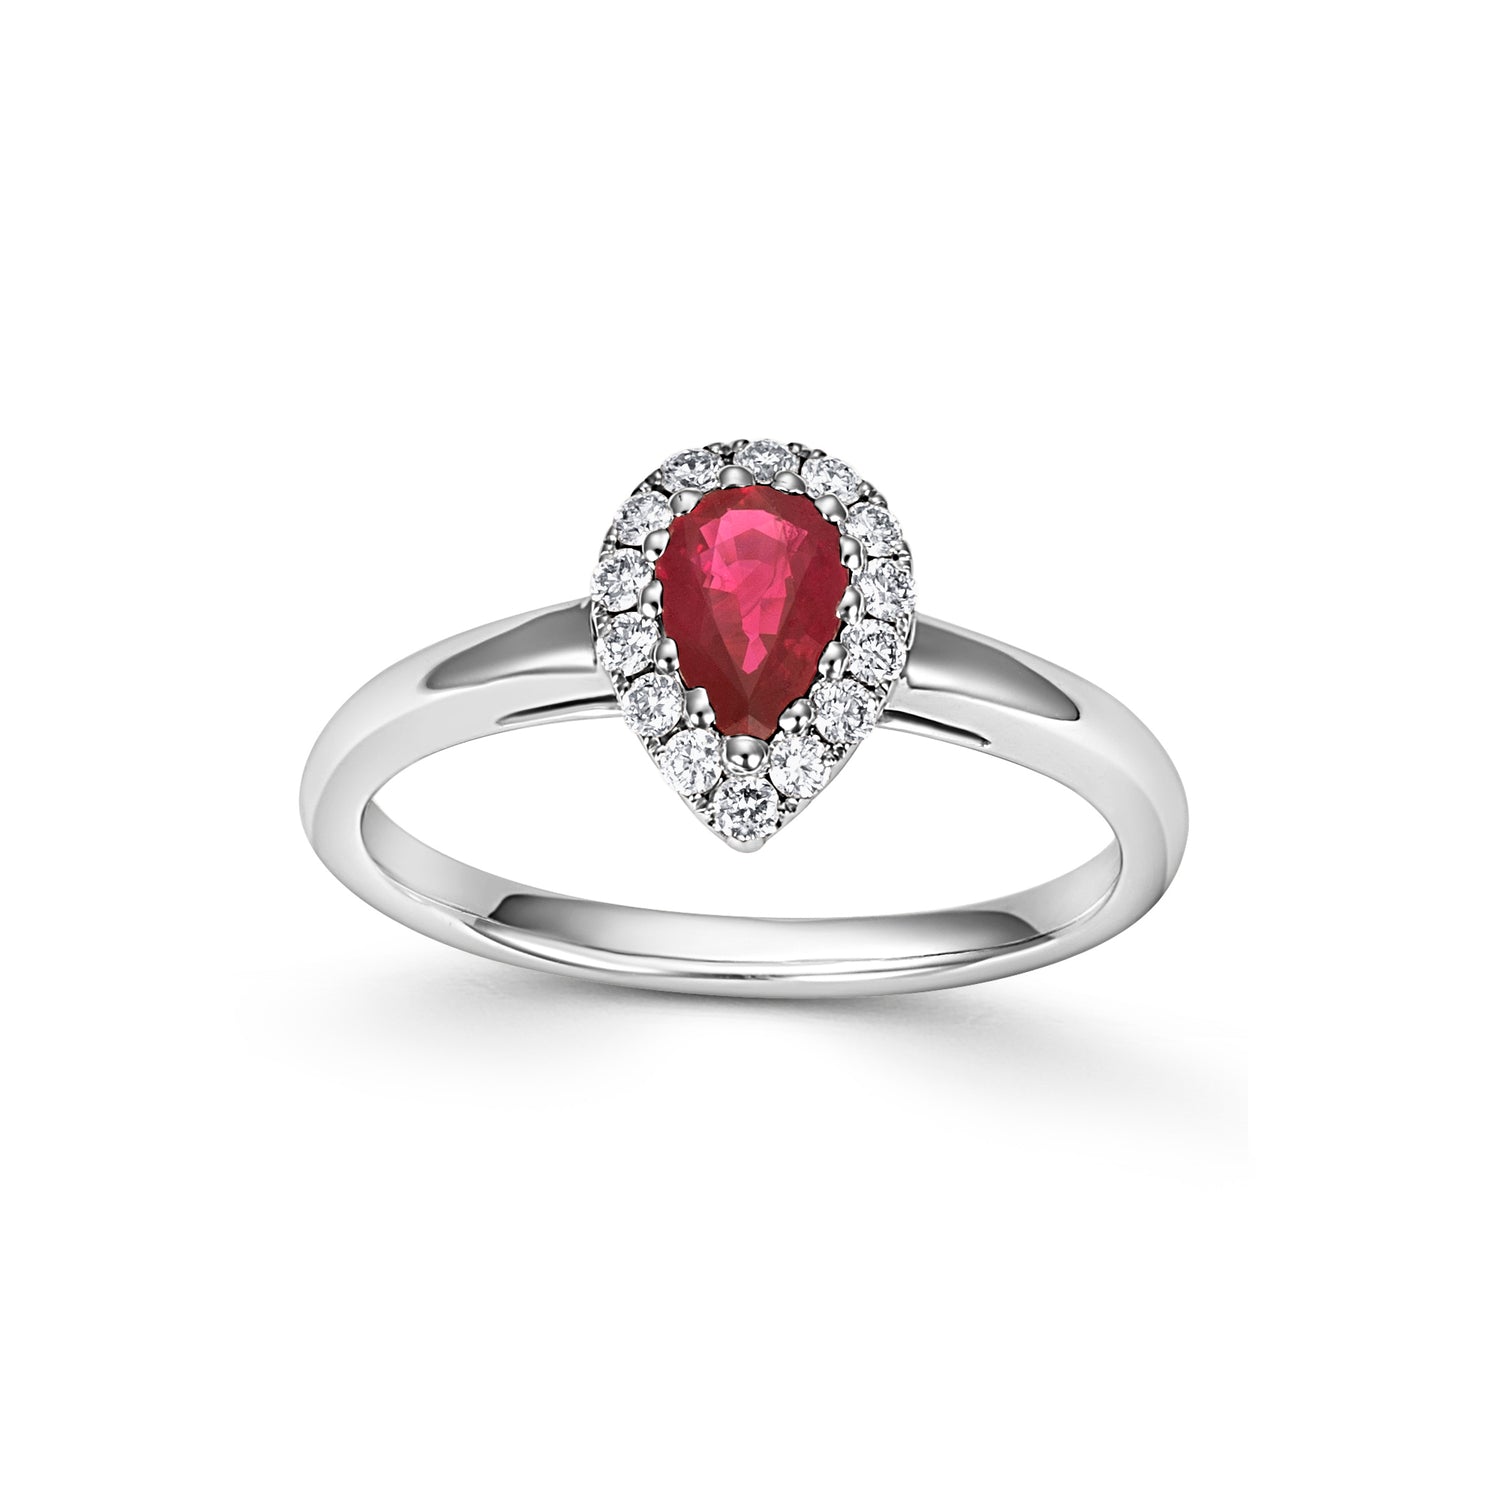 18CT White Gold Pear-shaped Ruby with Diamond Halo Ring